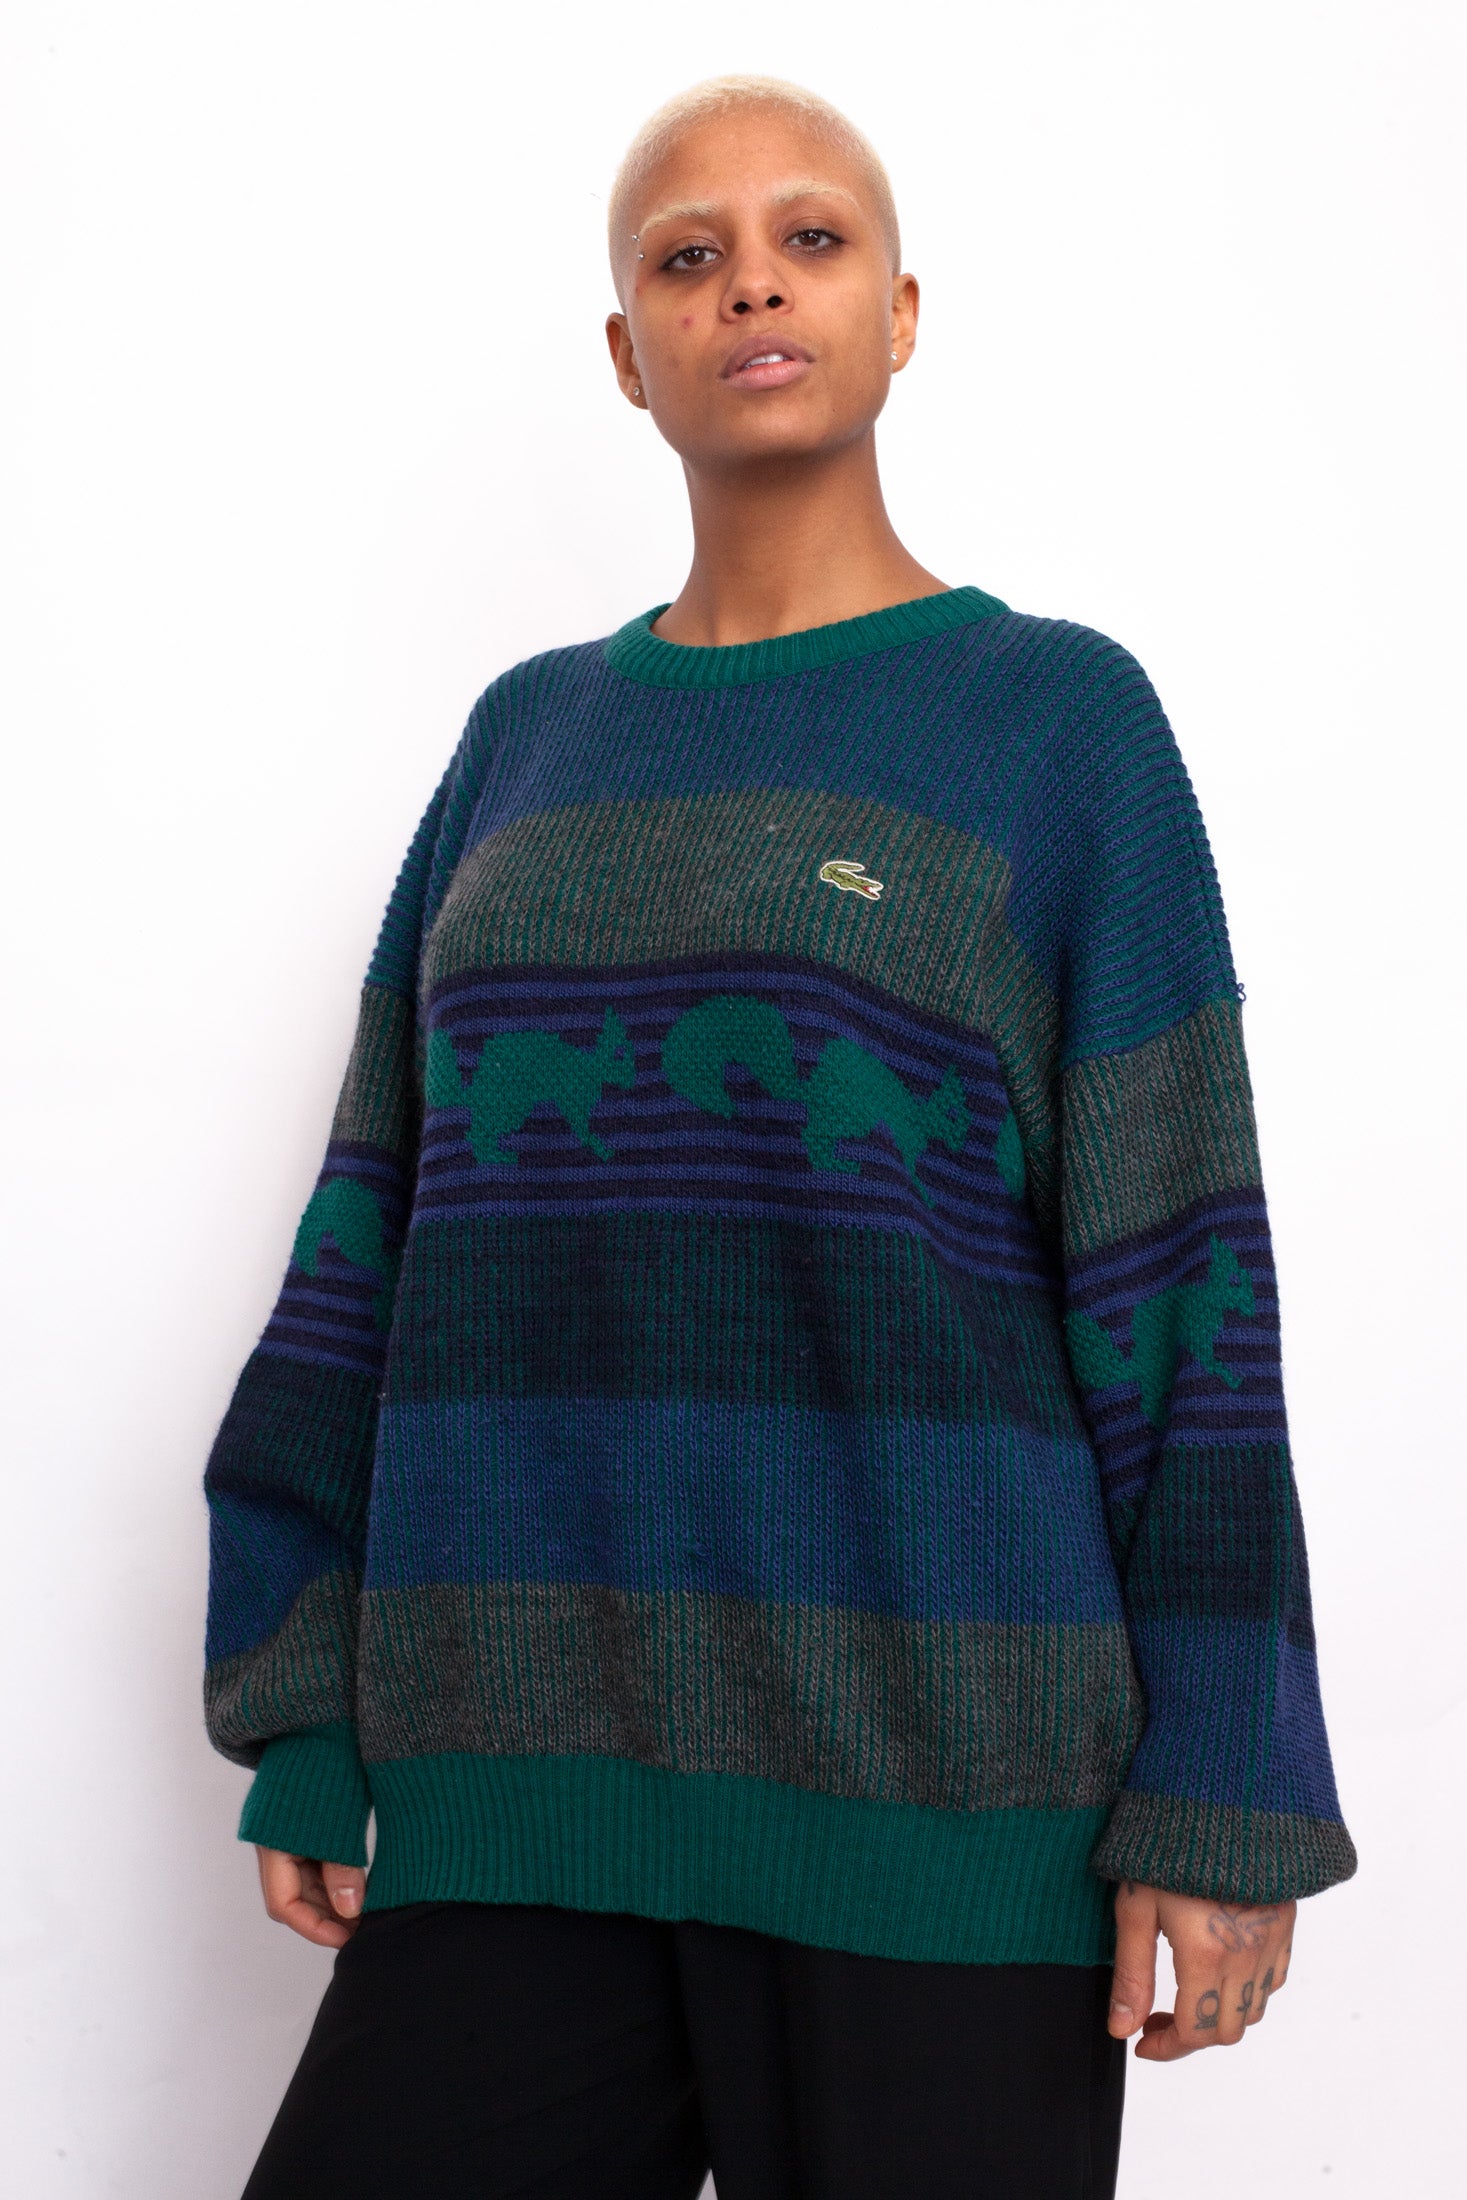 morgenmad omhyggelig oprejst Chemise Lacoste Pattern Wool Jumper – Not Too Sweet